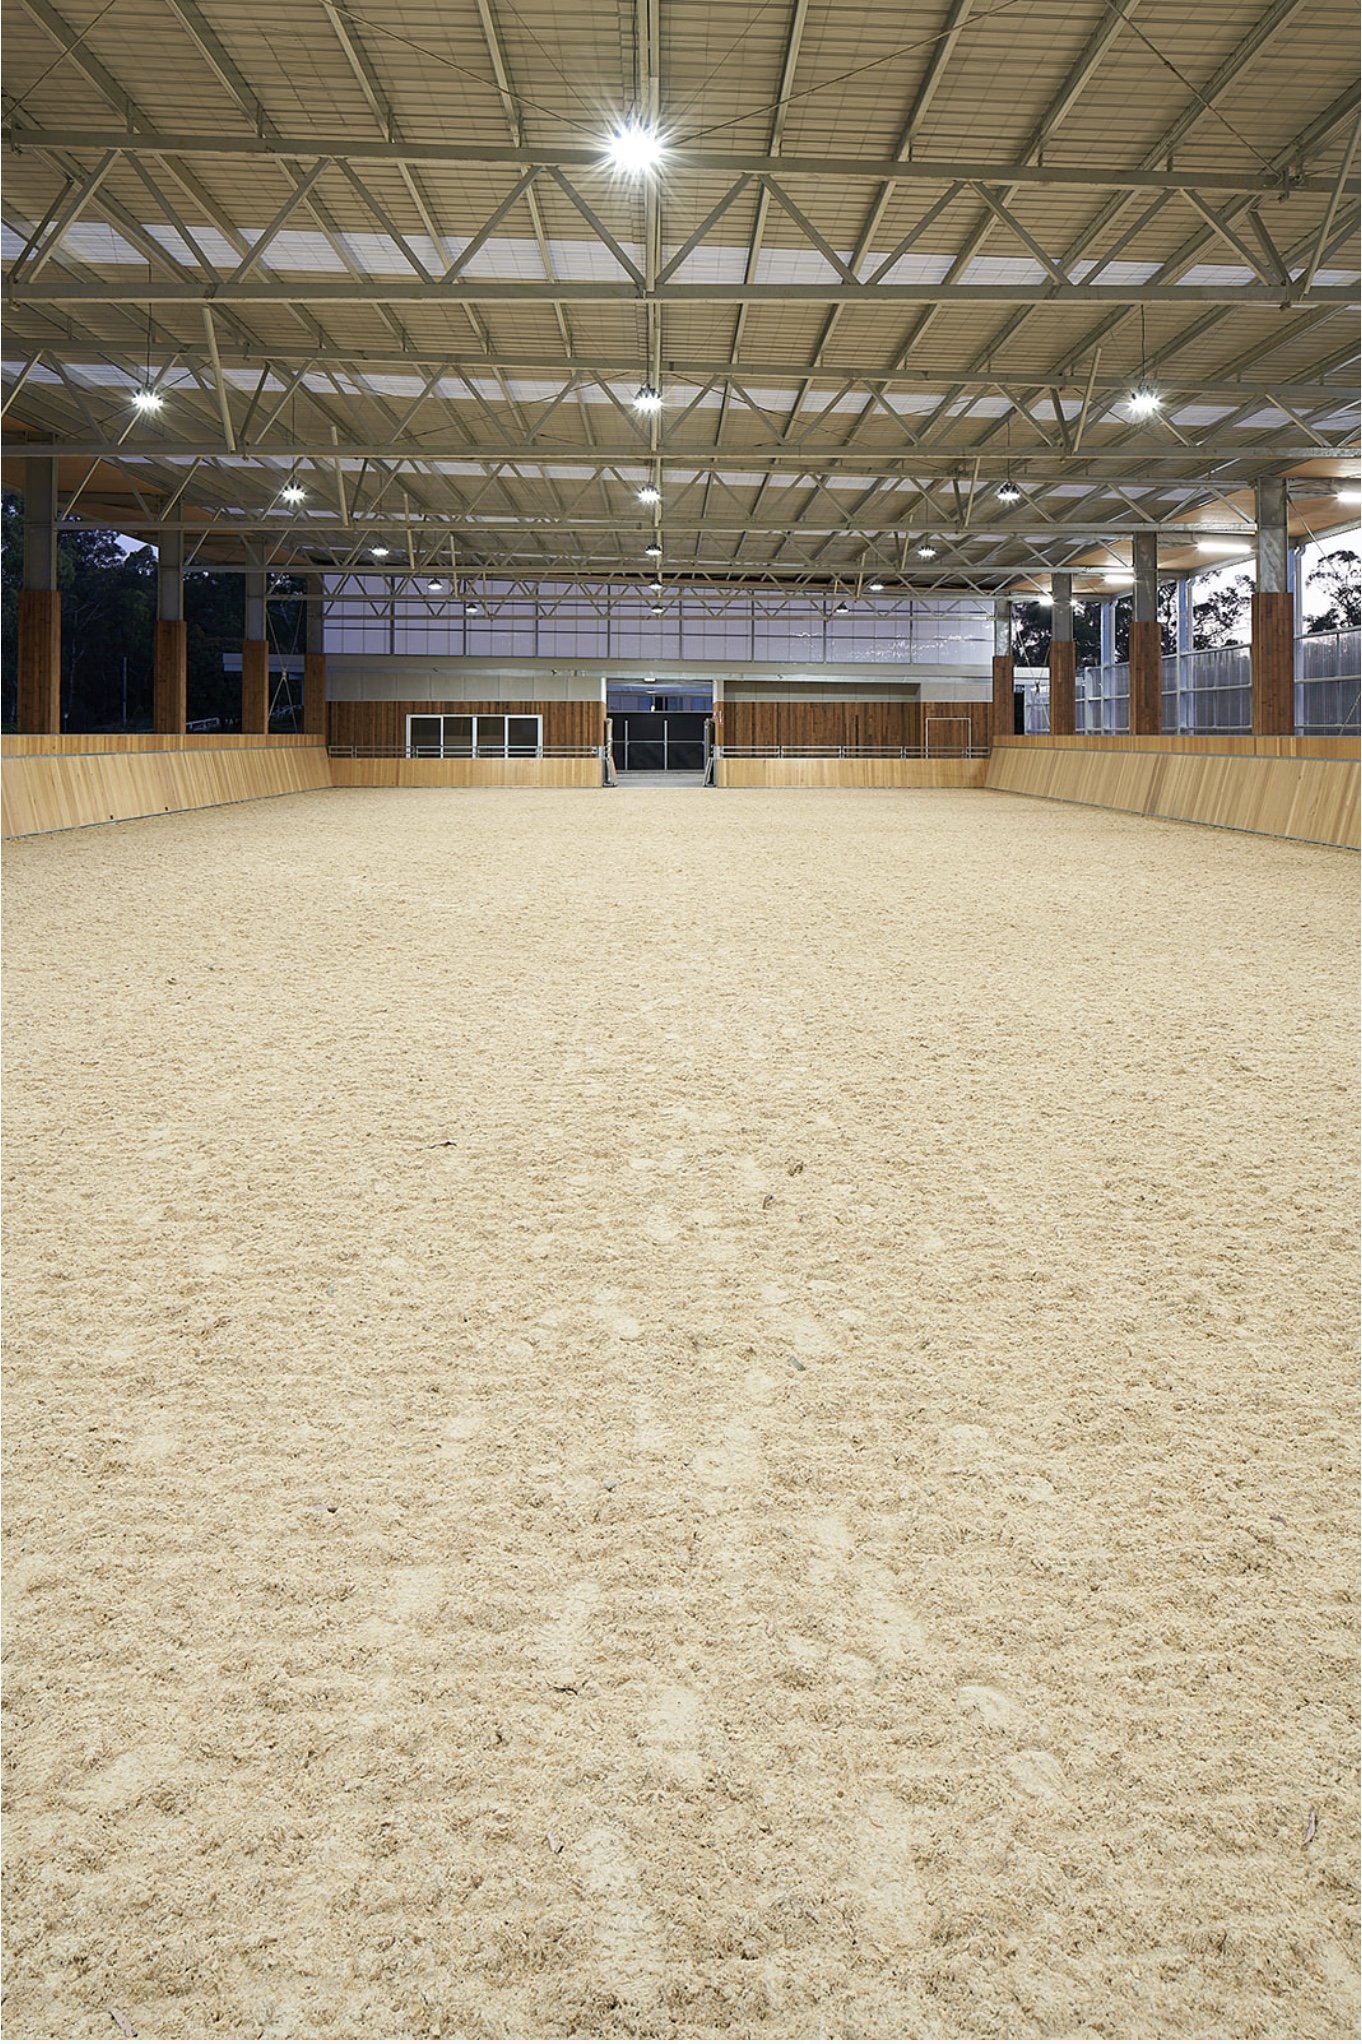  stable arena features a spacious area where horses can freely walk around